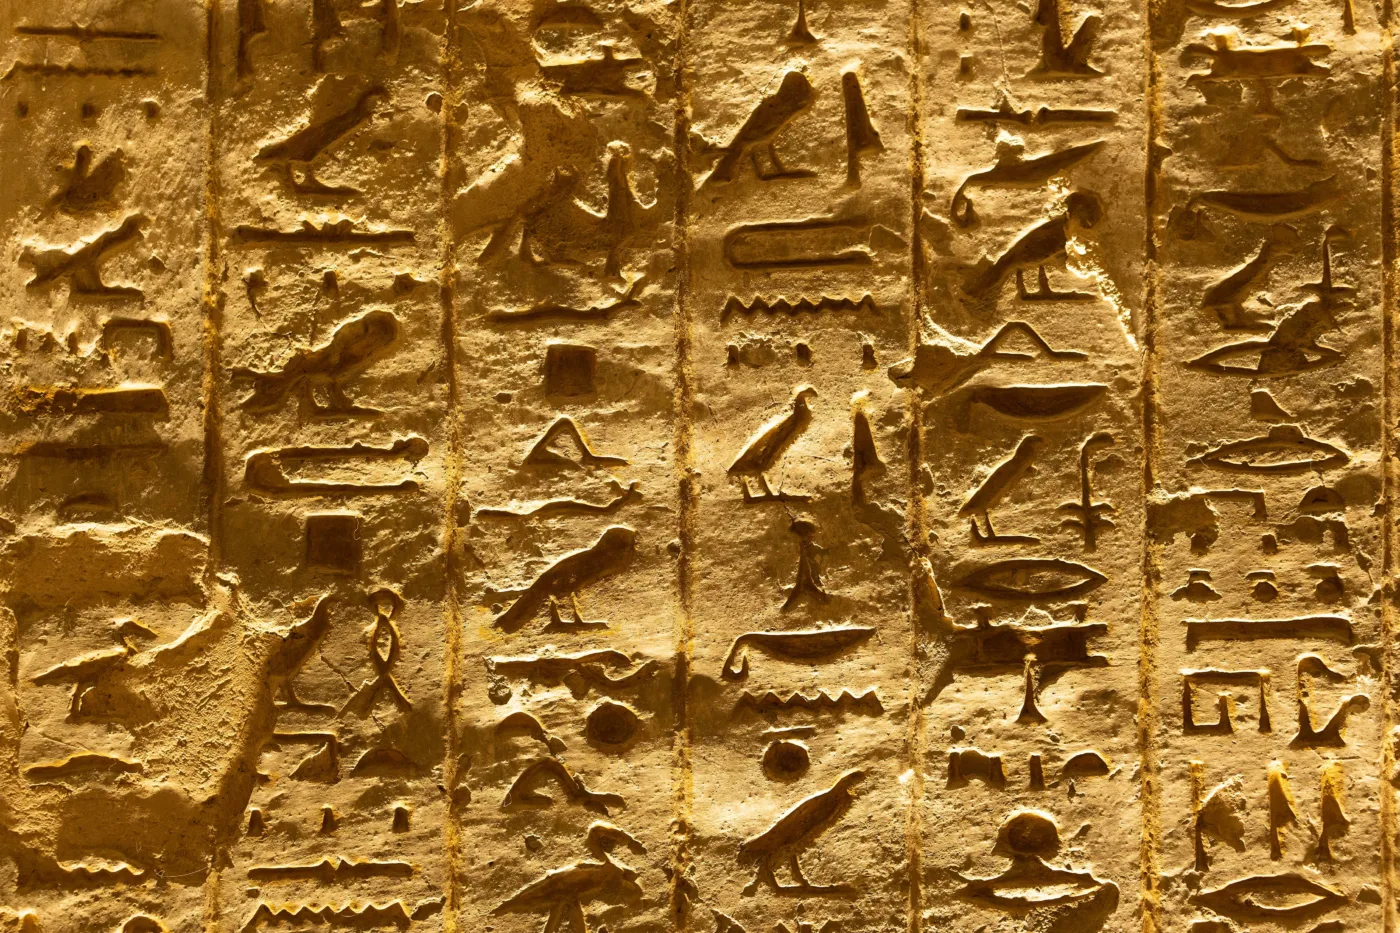 hieroglyphs relief on a tomb in the Valley of the Kings